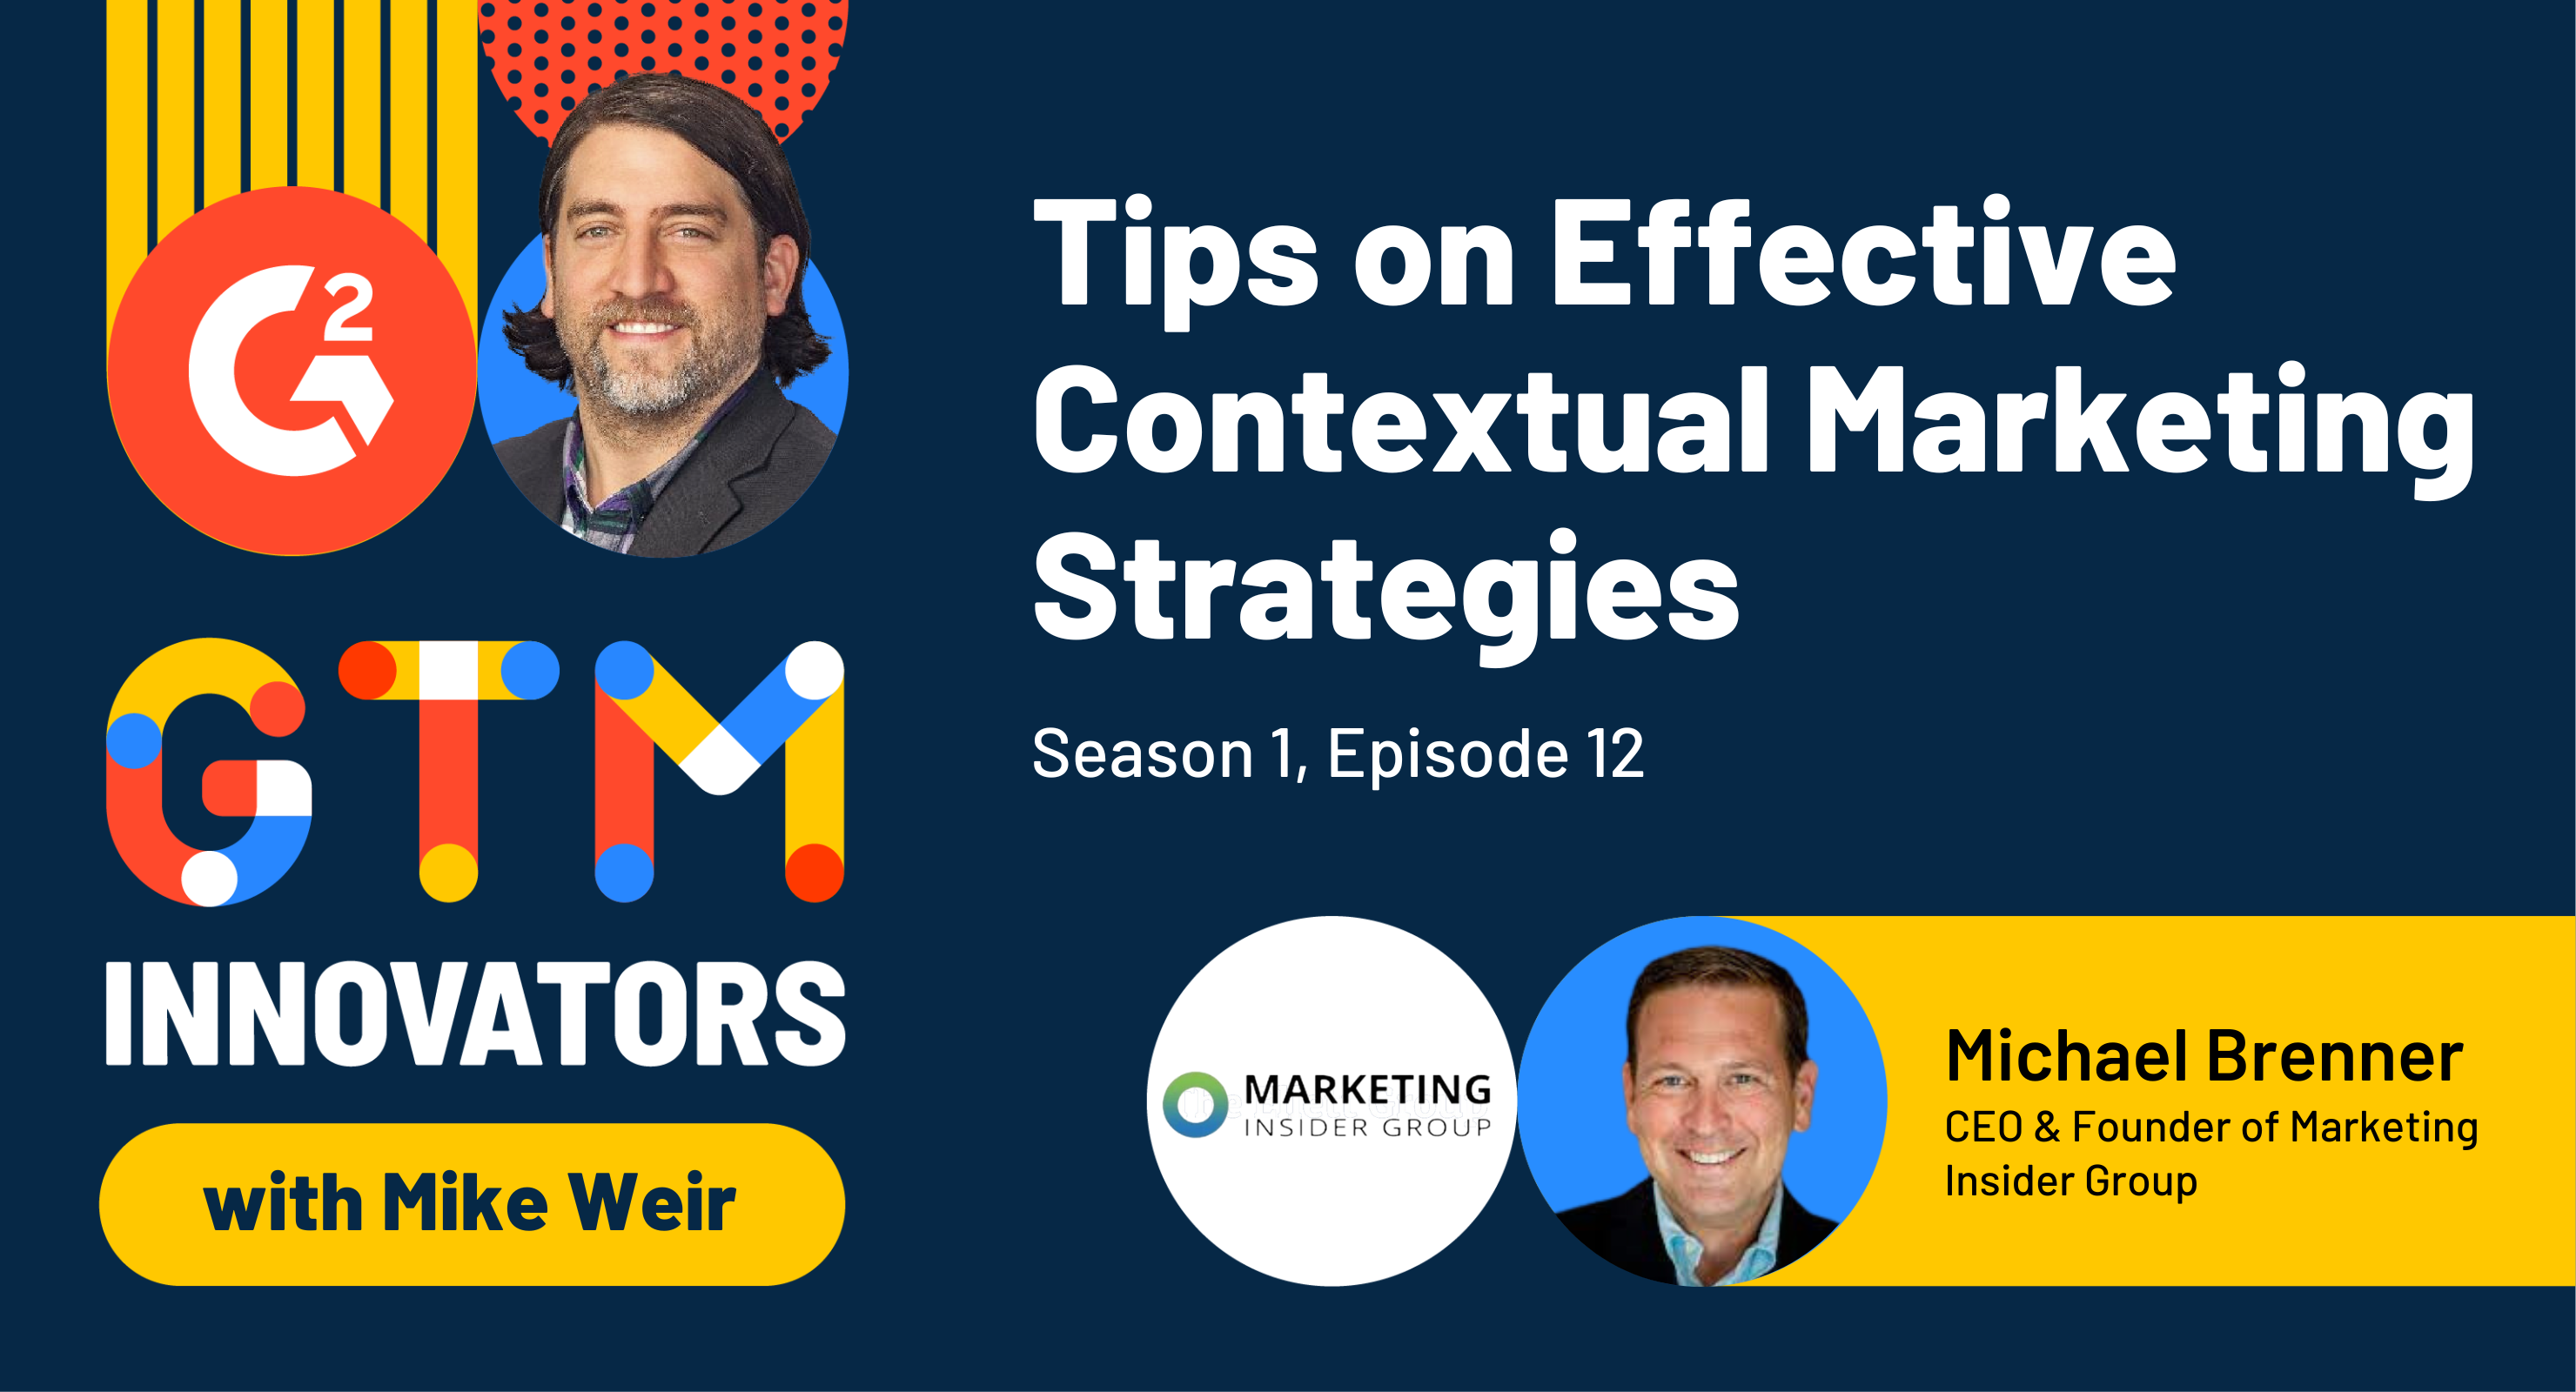 Michael Brenner’s Tips on Effective Contextual Marketing Strategies